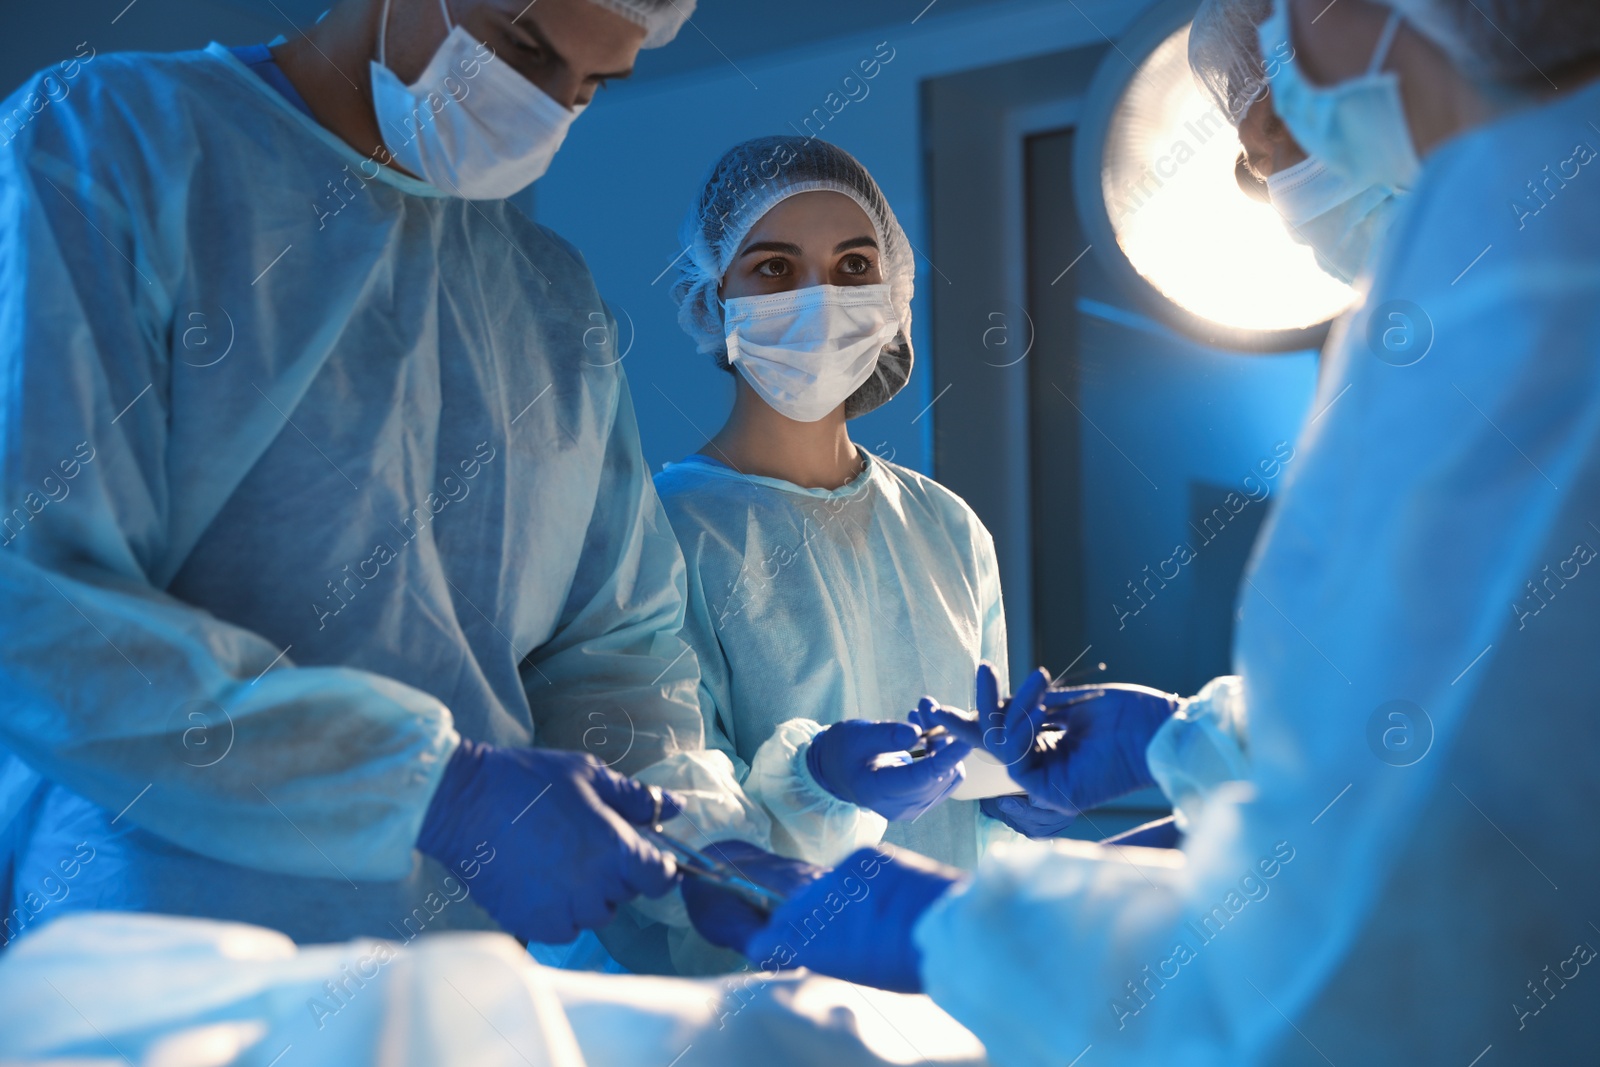 Photo of Team of professional surgeons performing operation in clinic